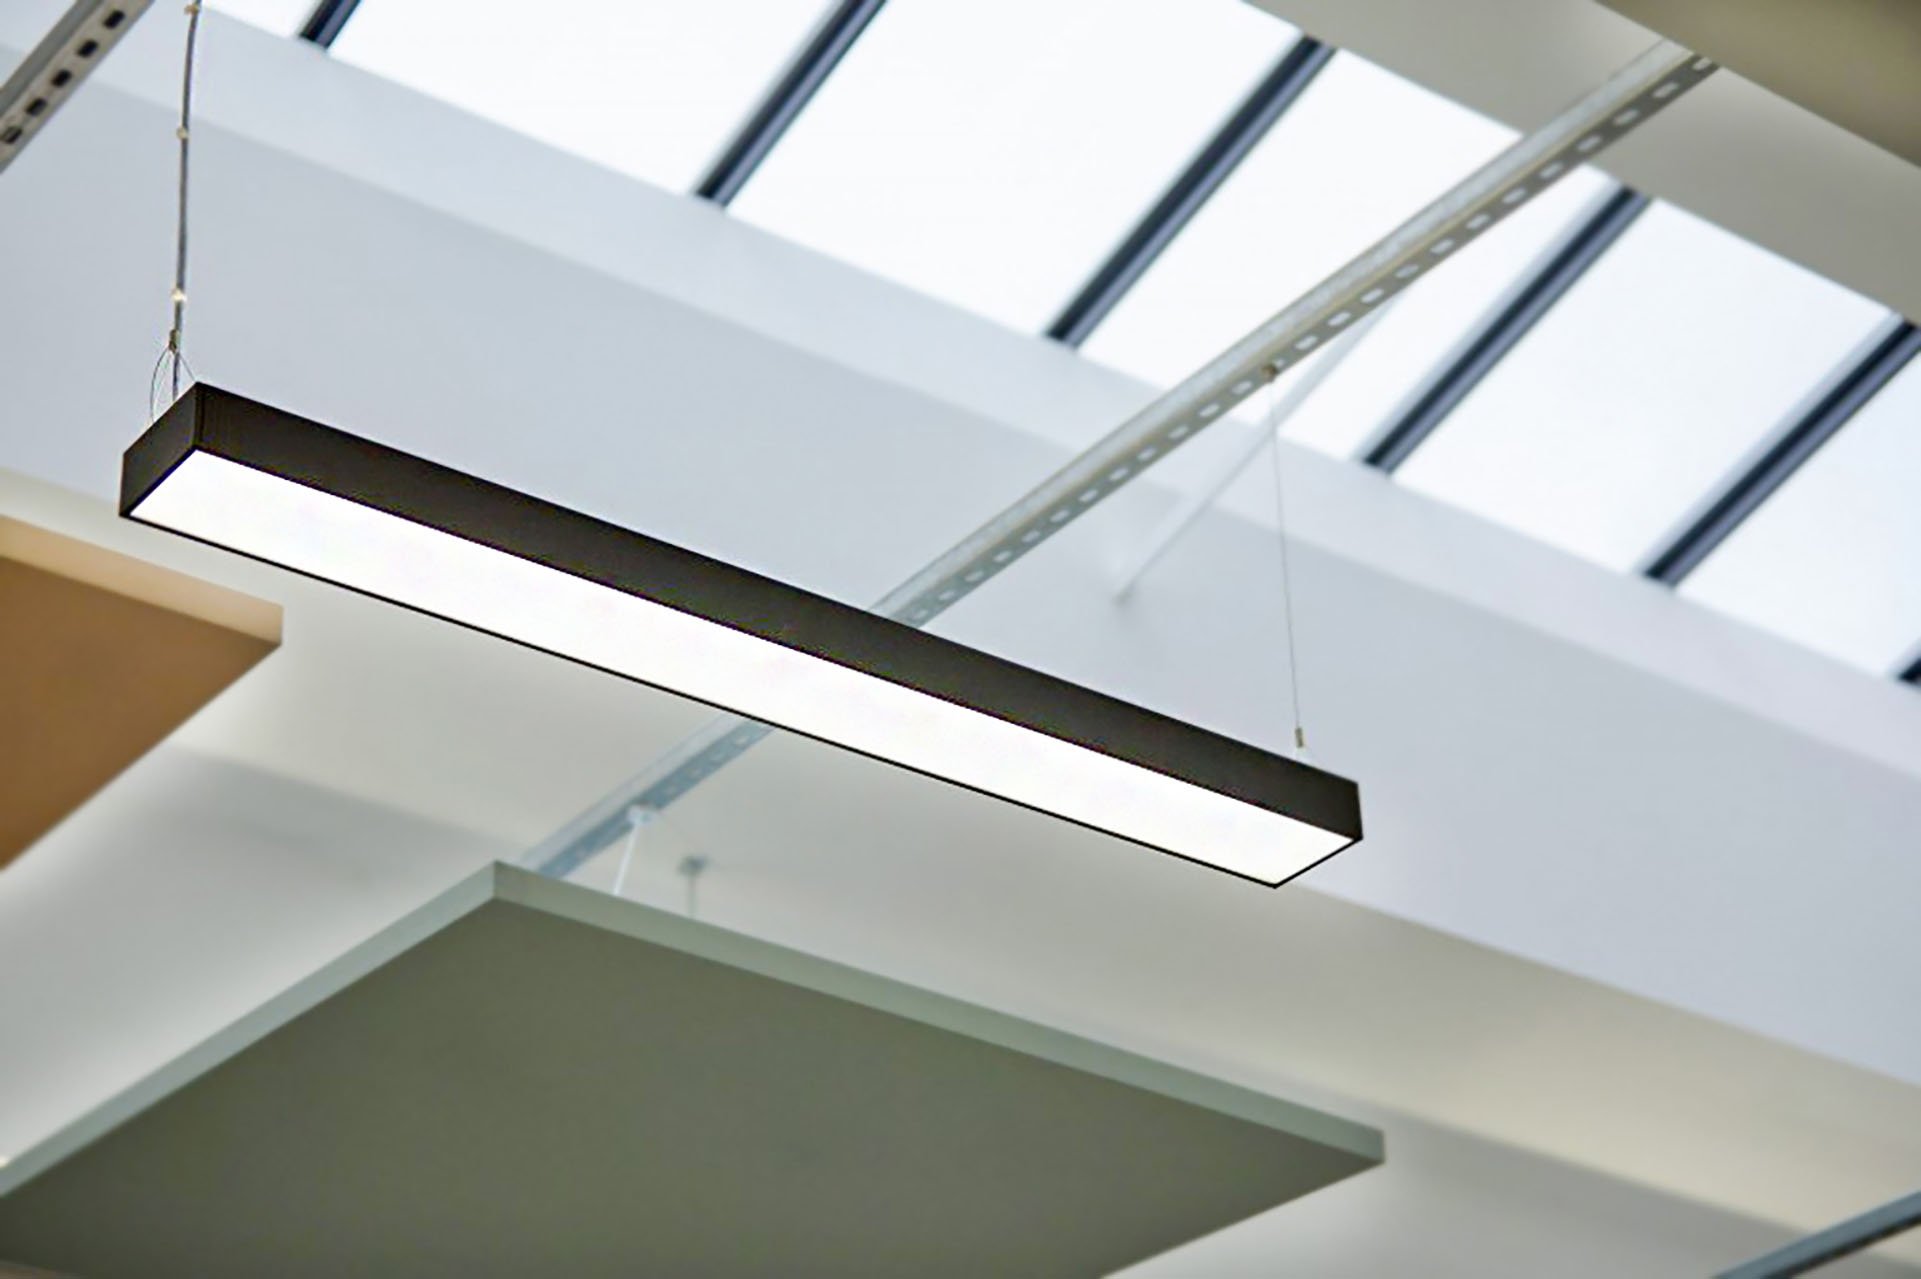 LG7 office lighting scheme for a CAT A refurbishment at Wentworth House, Milton Keynes.